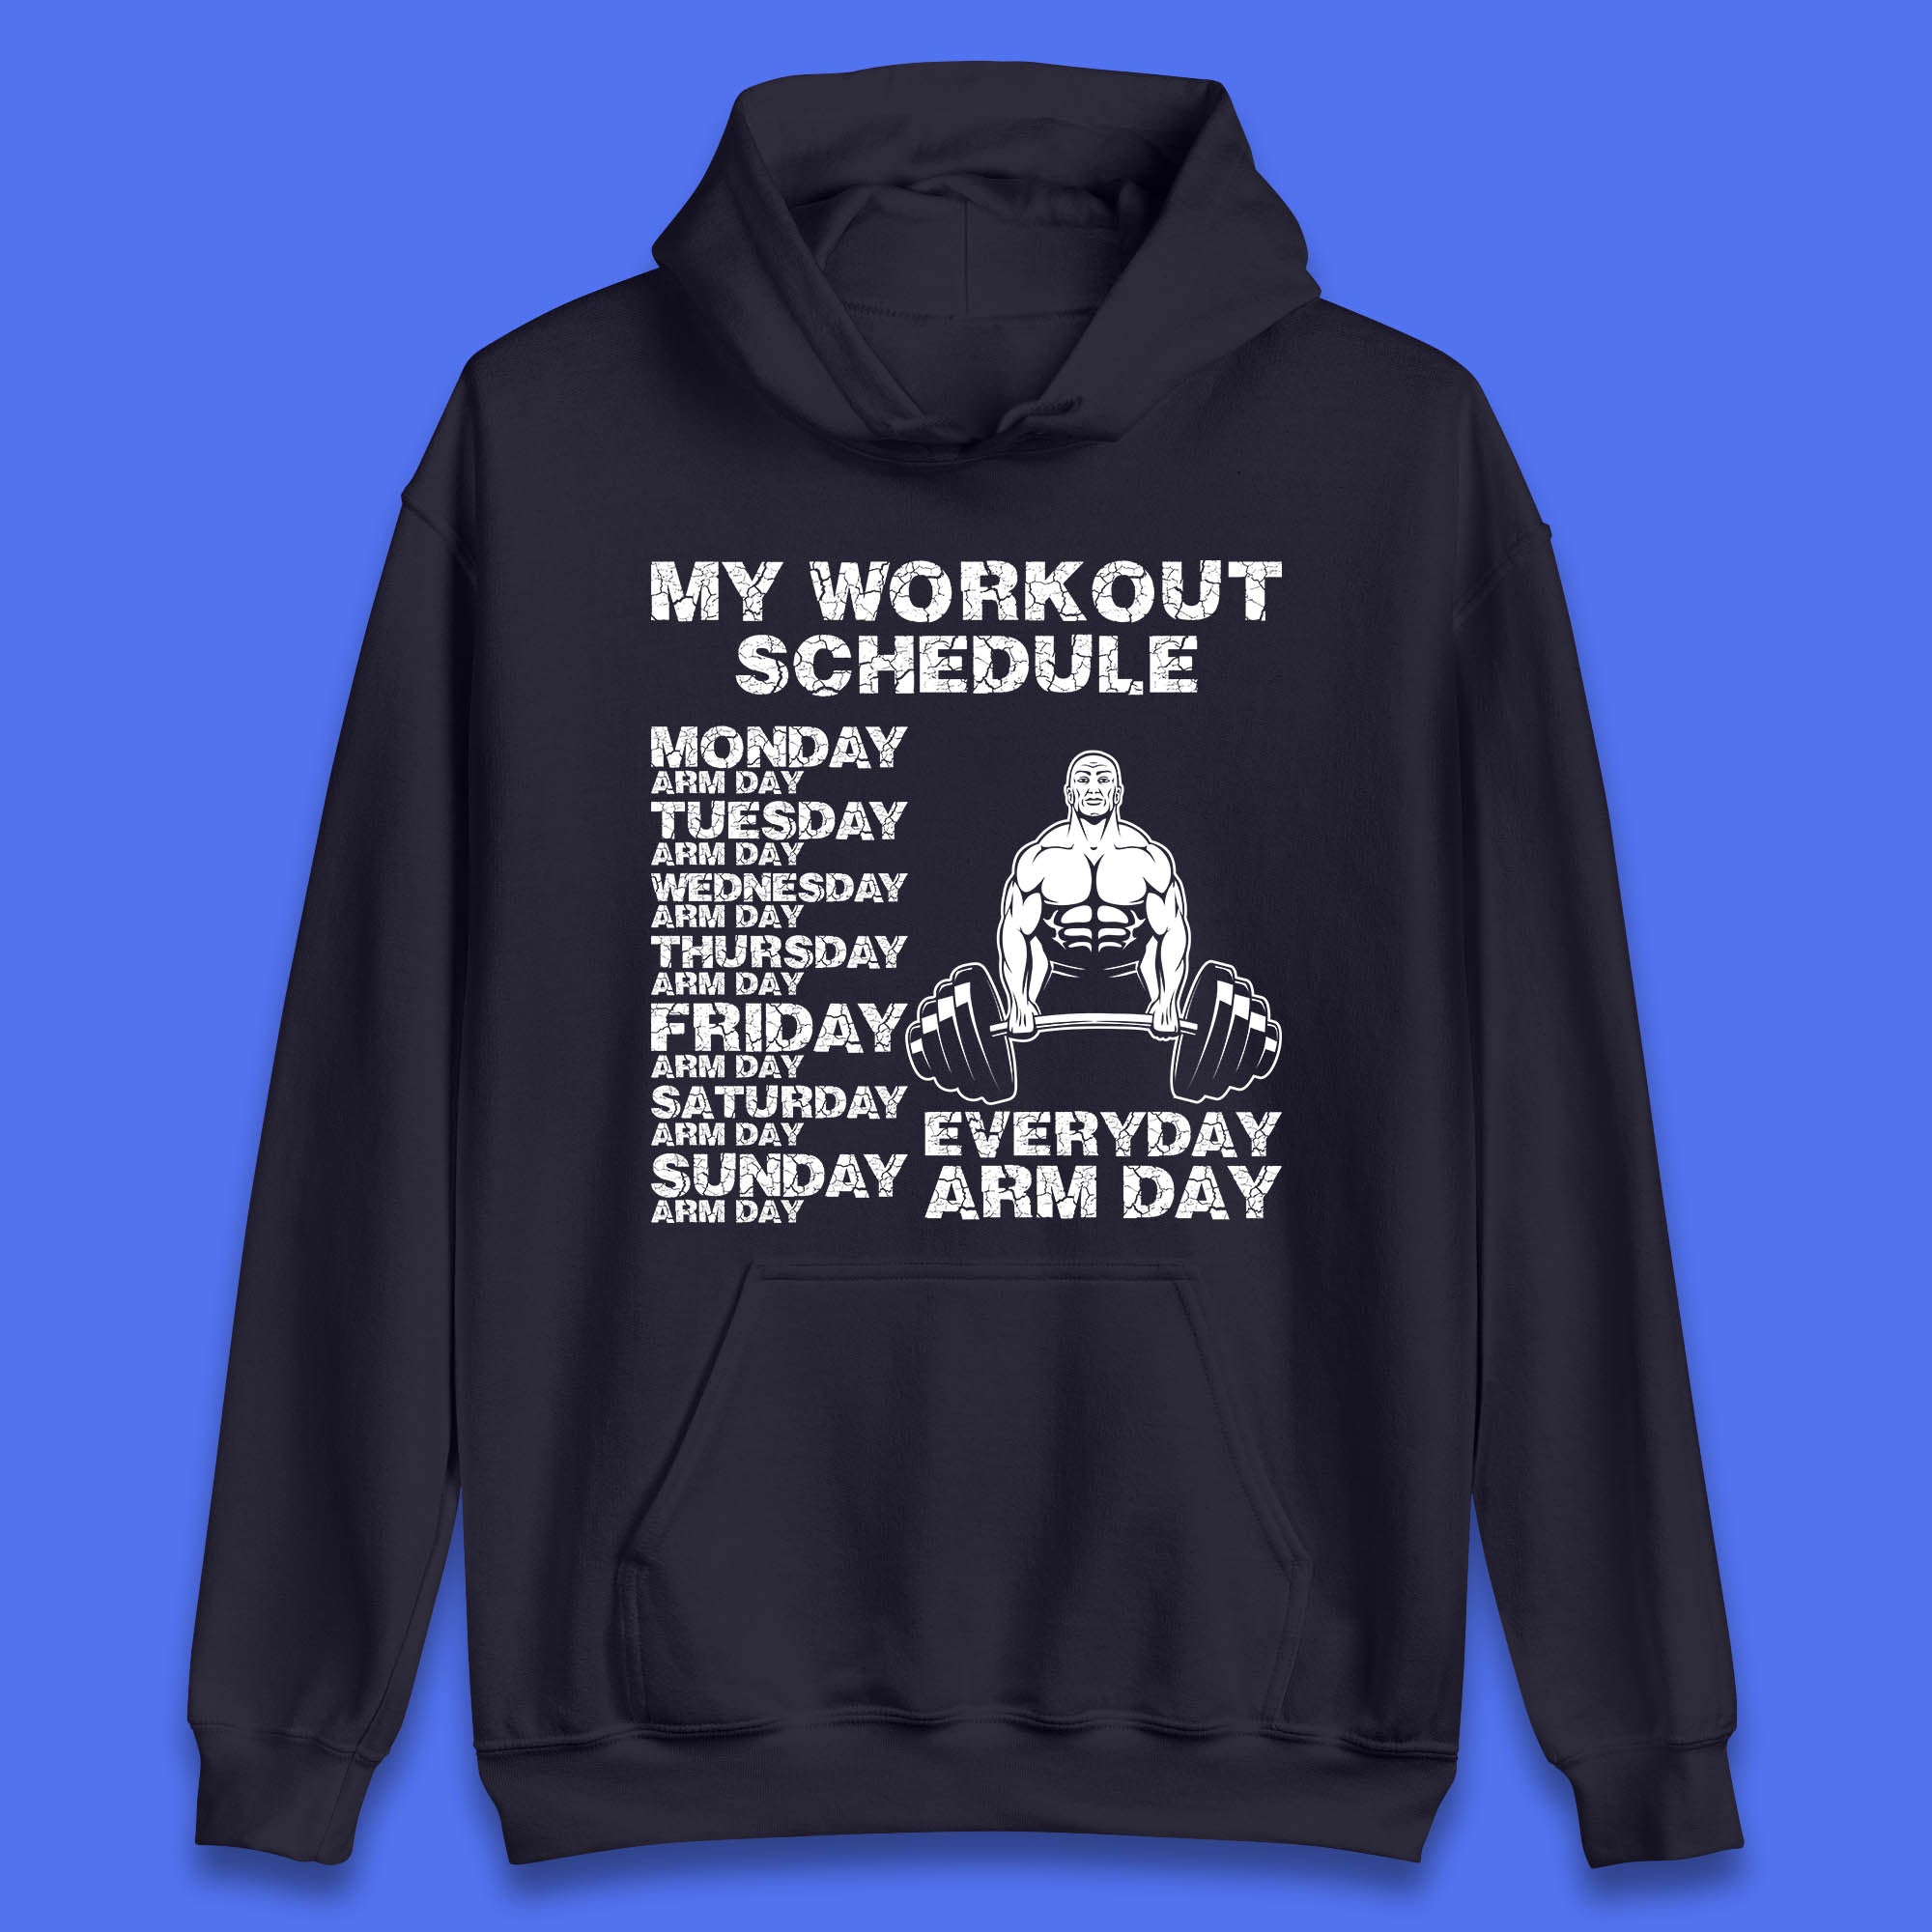 My Workout Schedule Everyday Arm Day Daily Routine  Arm Gym Workout Everyday Of Week Arm Day Fitness Unisex Hoodie